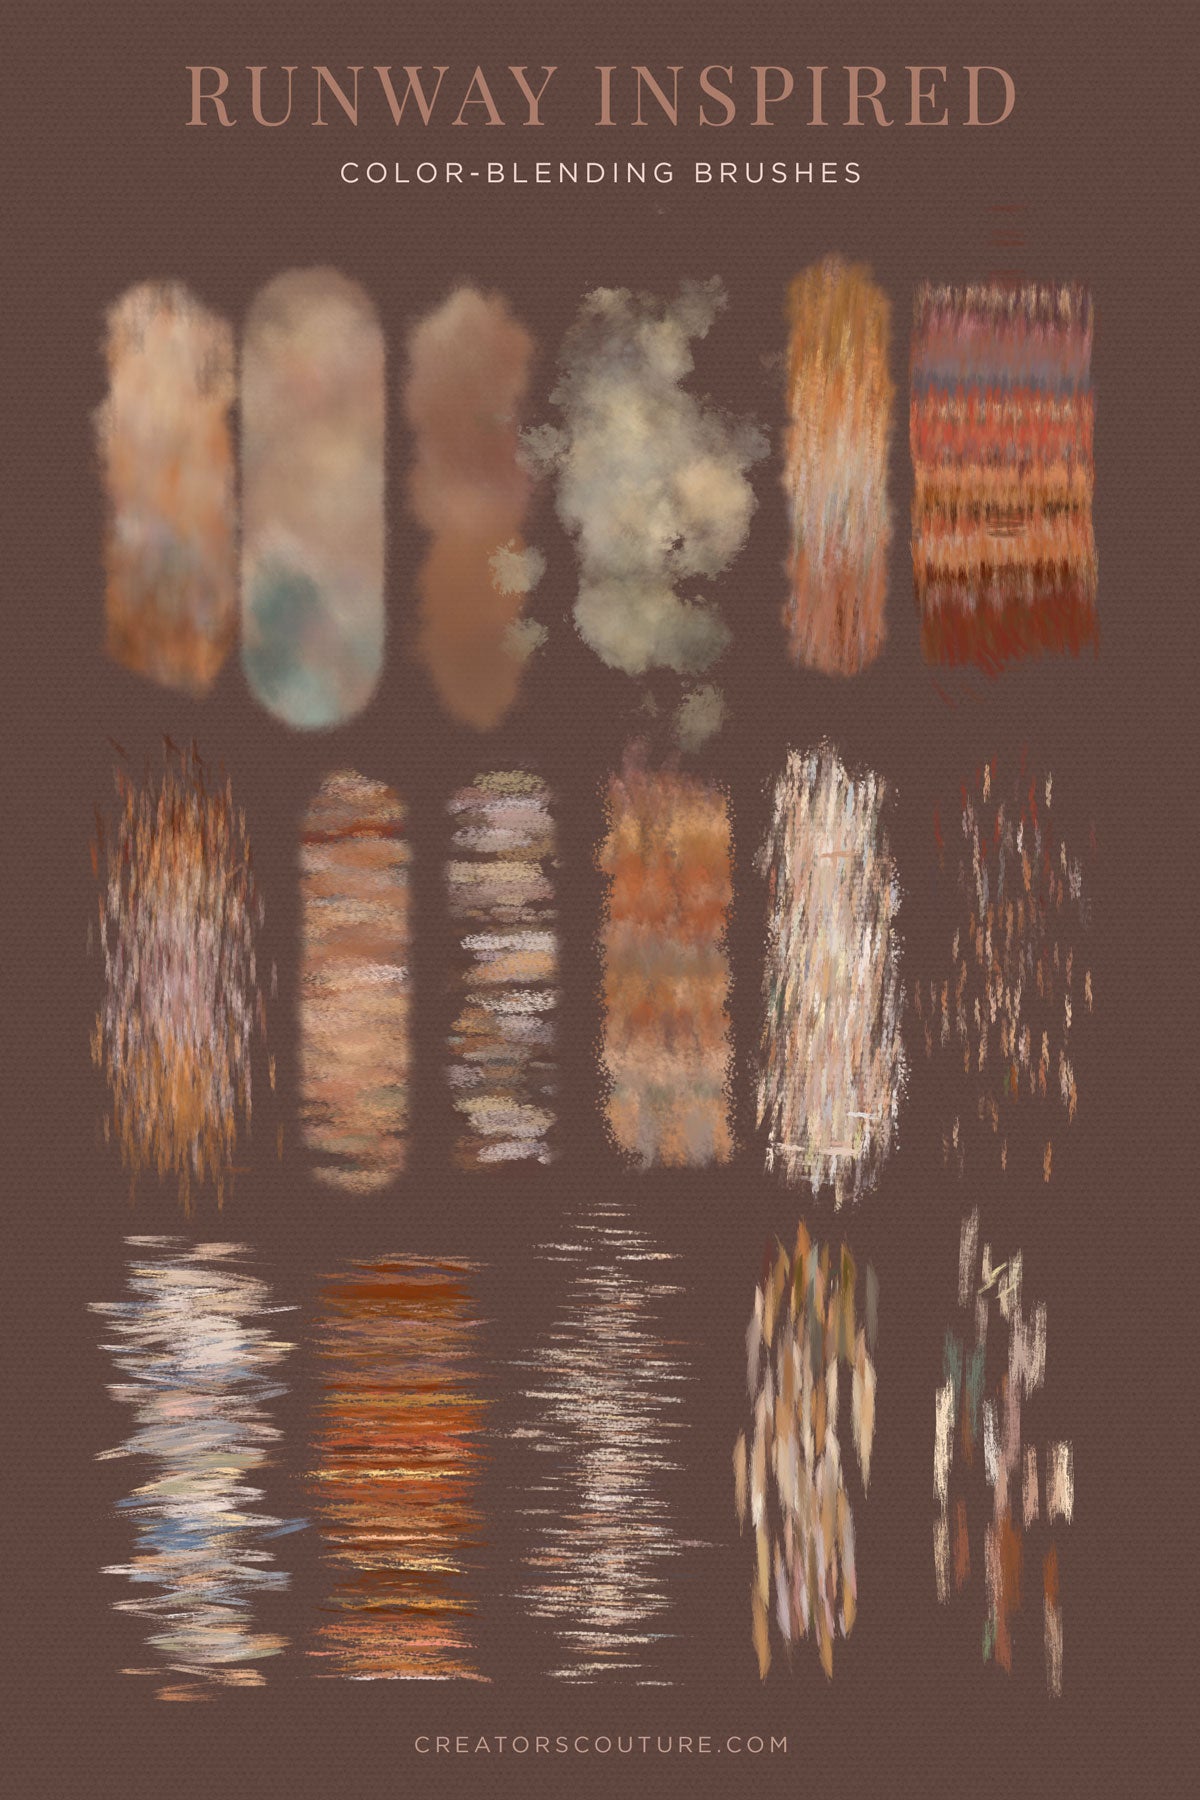 Fabric, Fiber, and Textile inspired multicolor Photoshop brushes, cover image, earthy color brush strokes on a brown background, brush chart